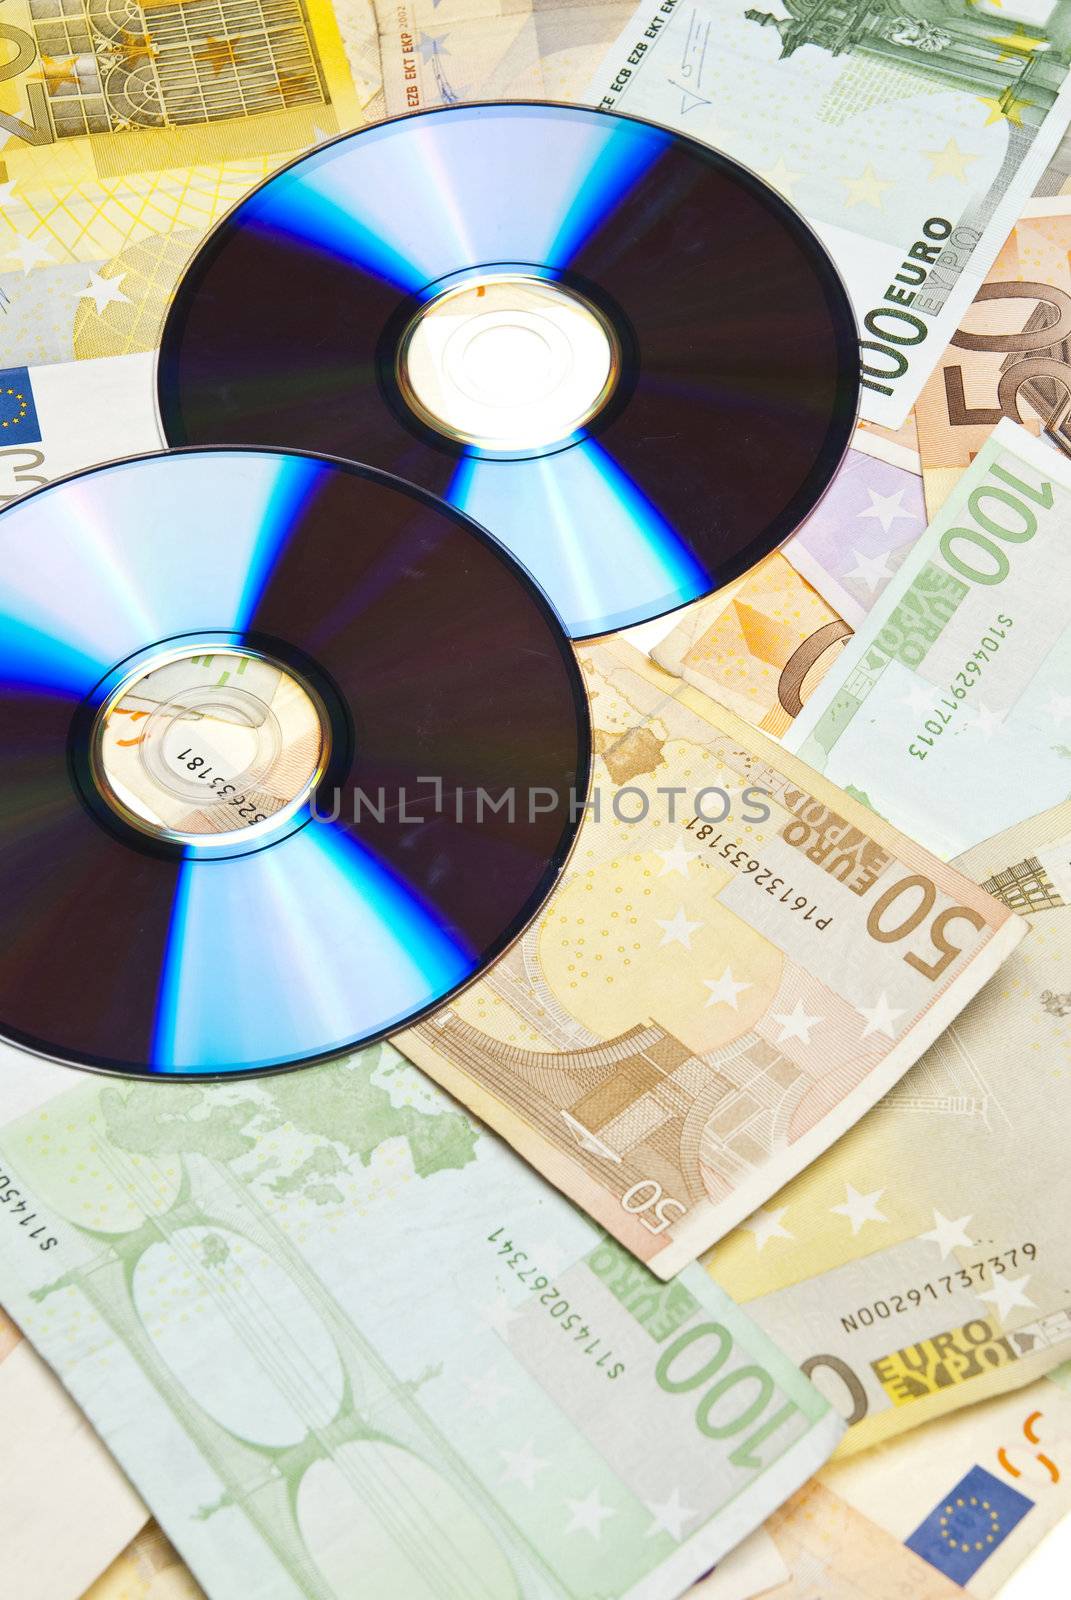 Compact Disks with euros below them,on white background.